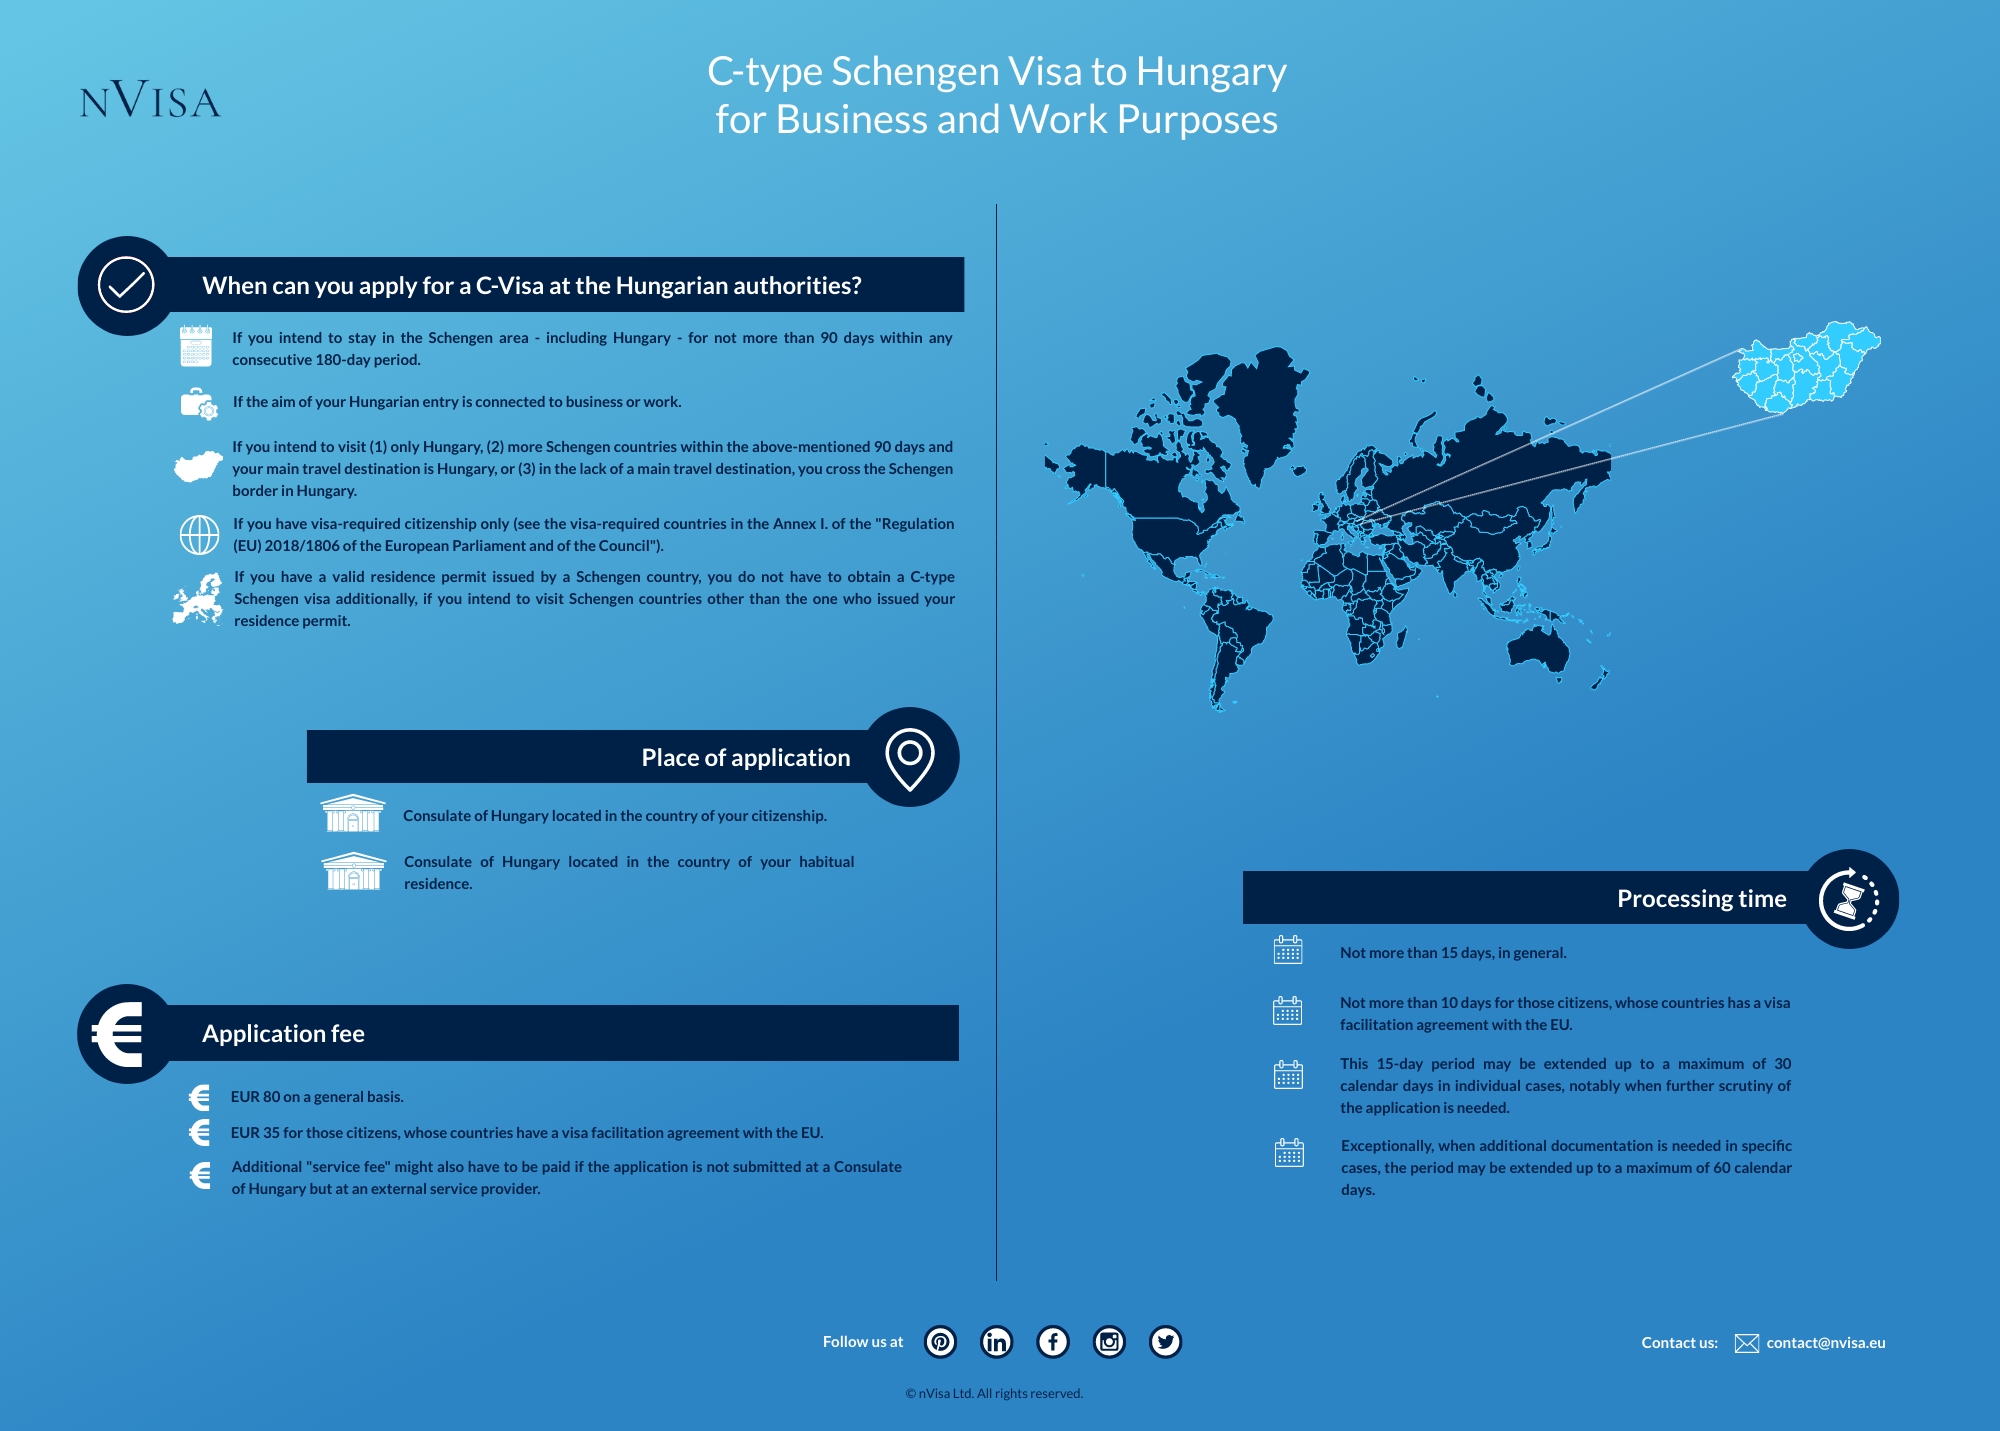 Infographic about immigration requirements and the details of obtaining a C-type Schengen Visa for the purpose of business or work in Hungary.